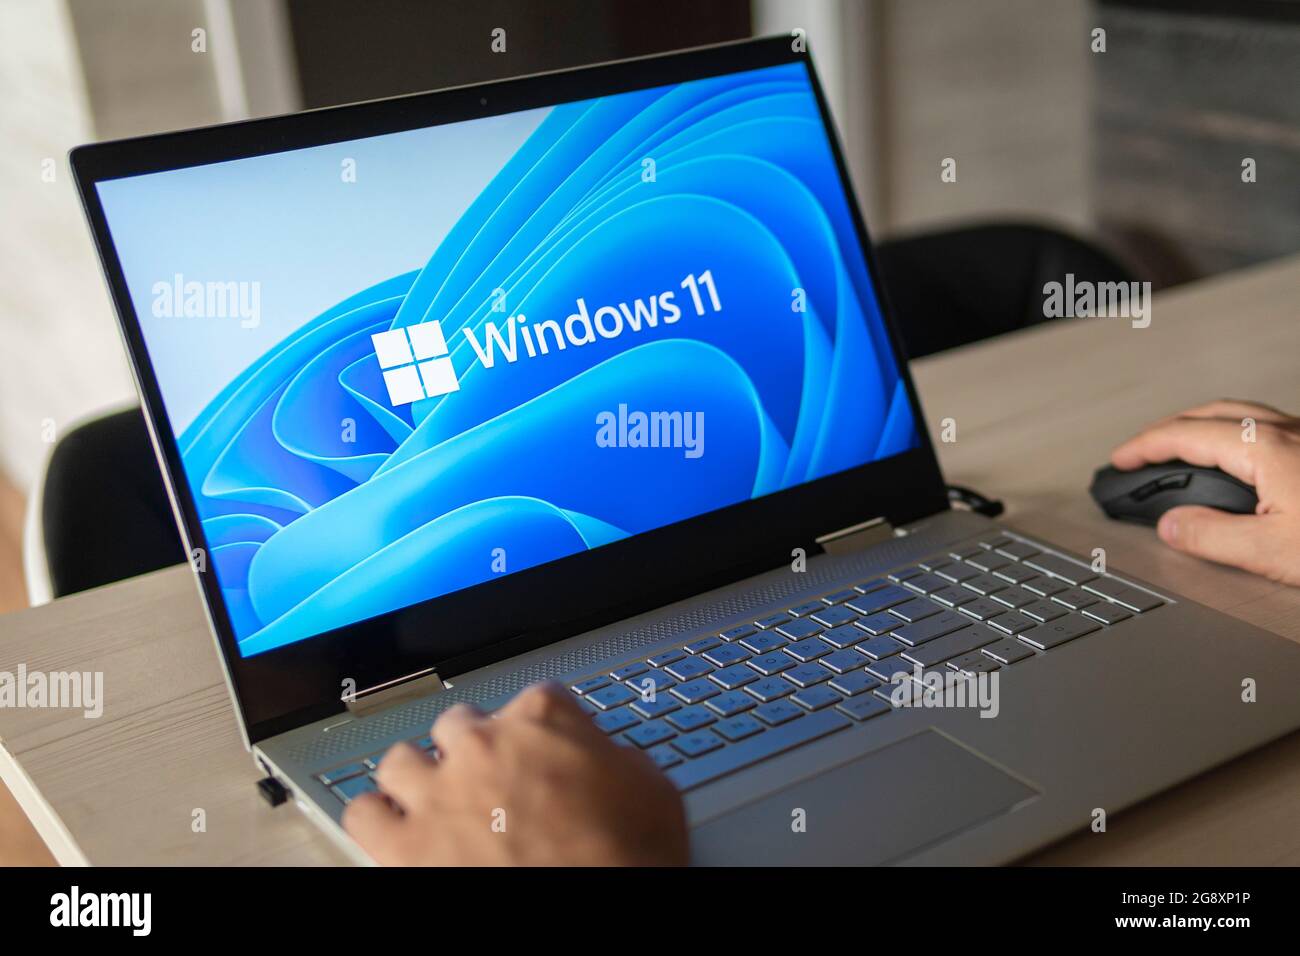 June 23, 2021. Barnaul, Russia. Windows 11 logo on laptop screen. A new operating system update from Microsoft Stock Photo